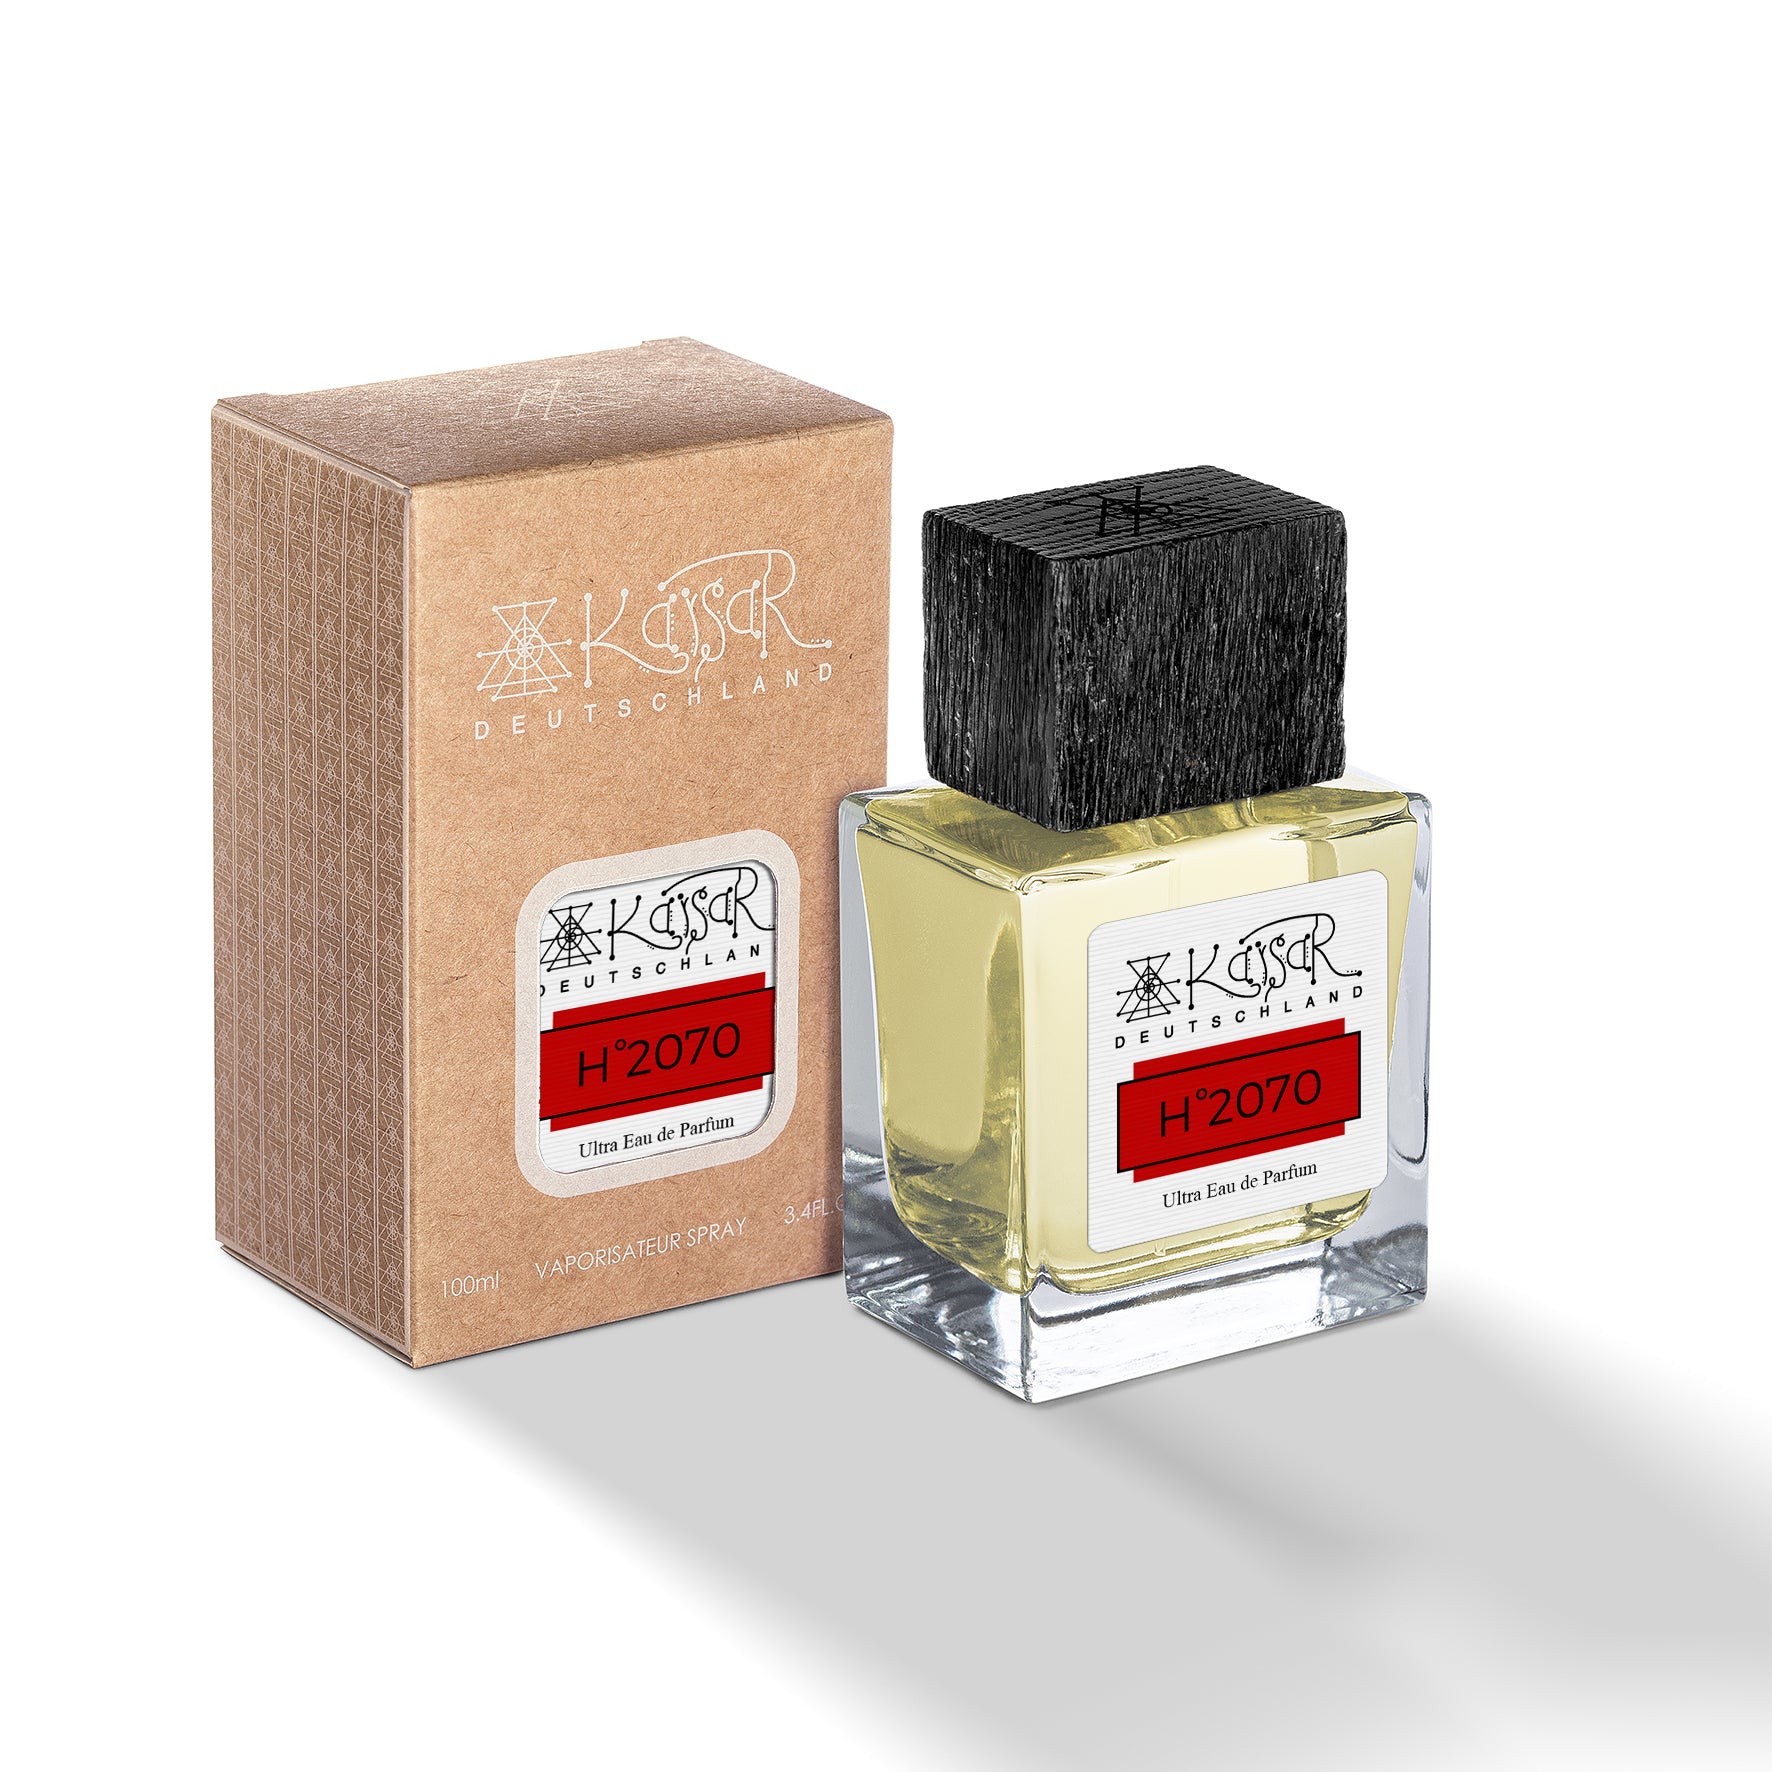 H°2070 P. Red Scent